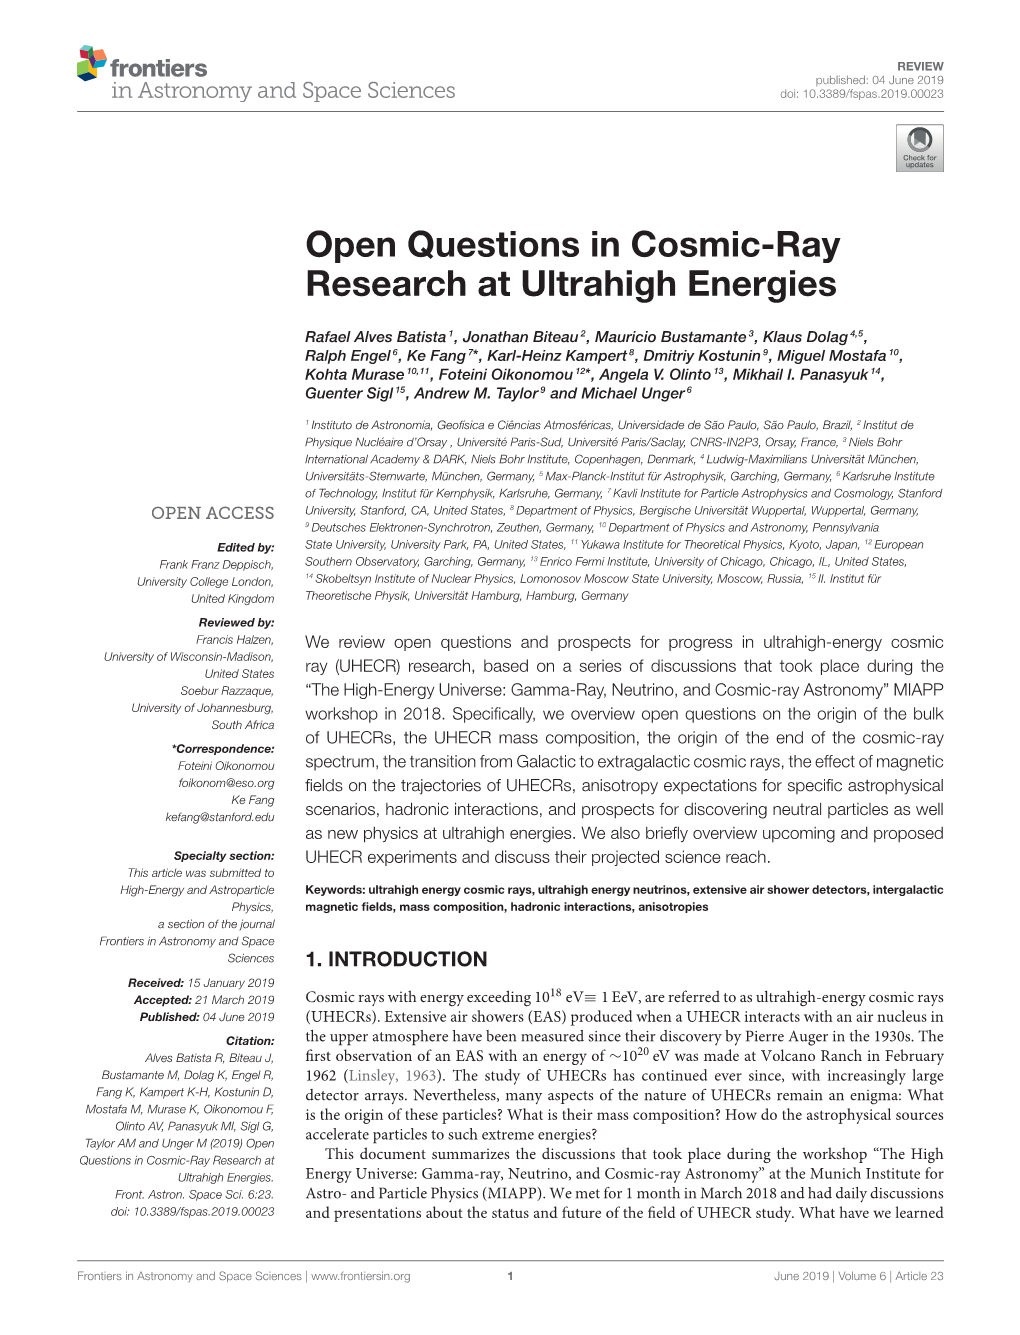 Open Questions in Cosmic-Ray Research at Ultrahigh Energies